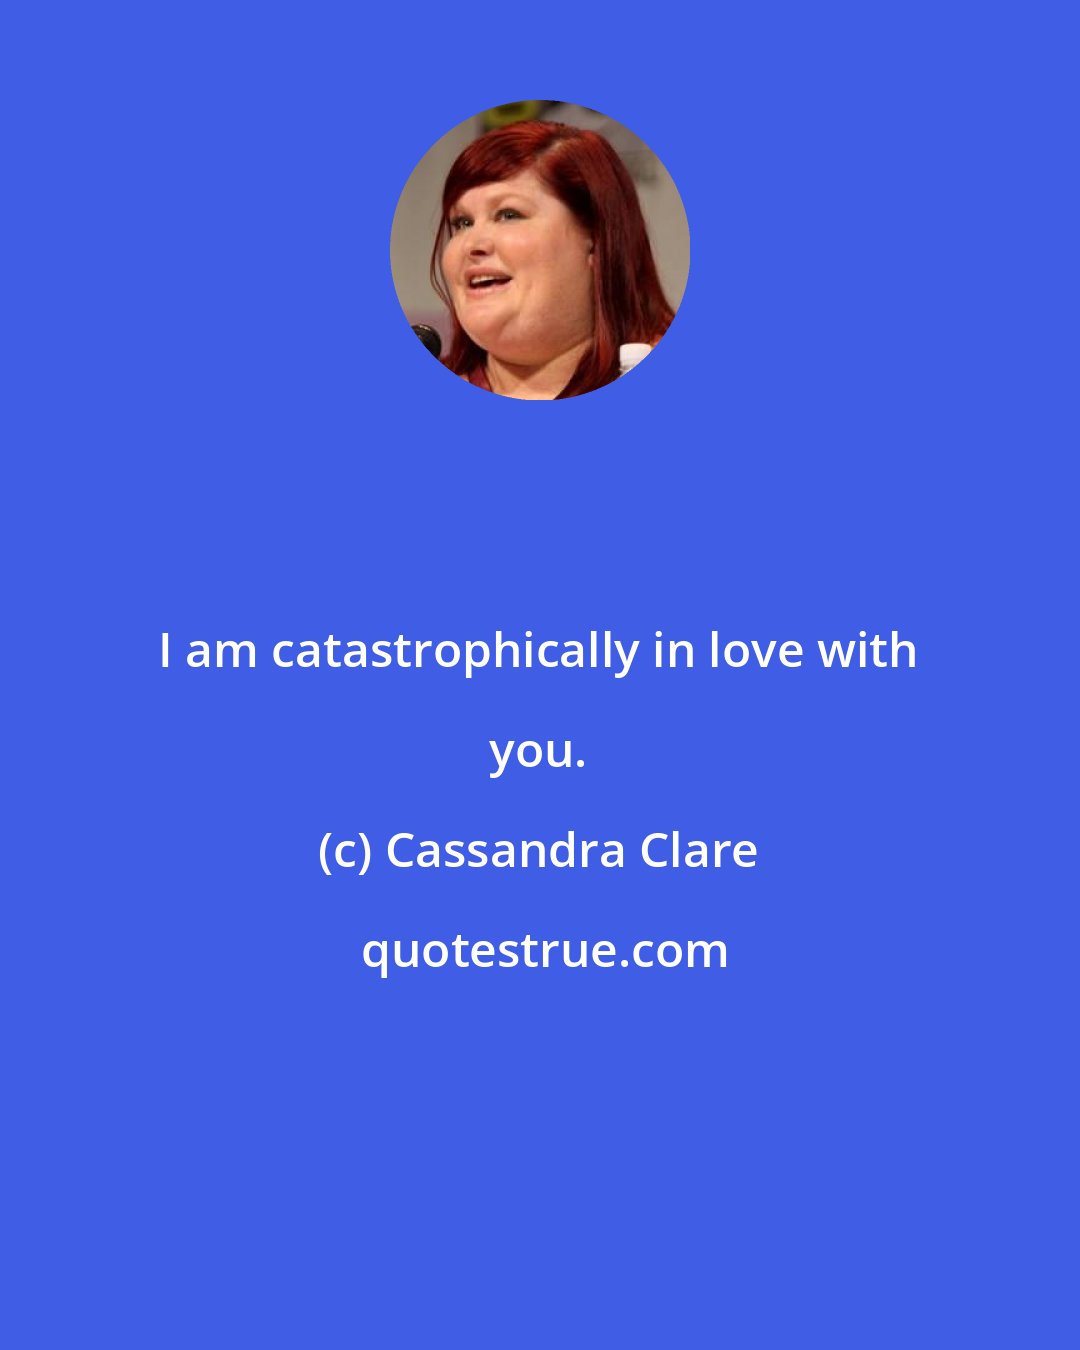 Cassandra Clare: I am catastrophically in love with you.